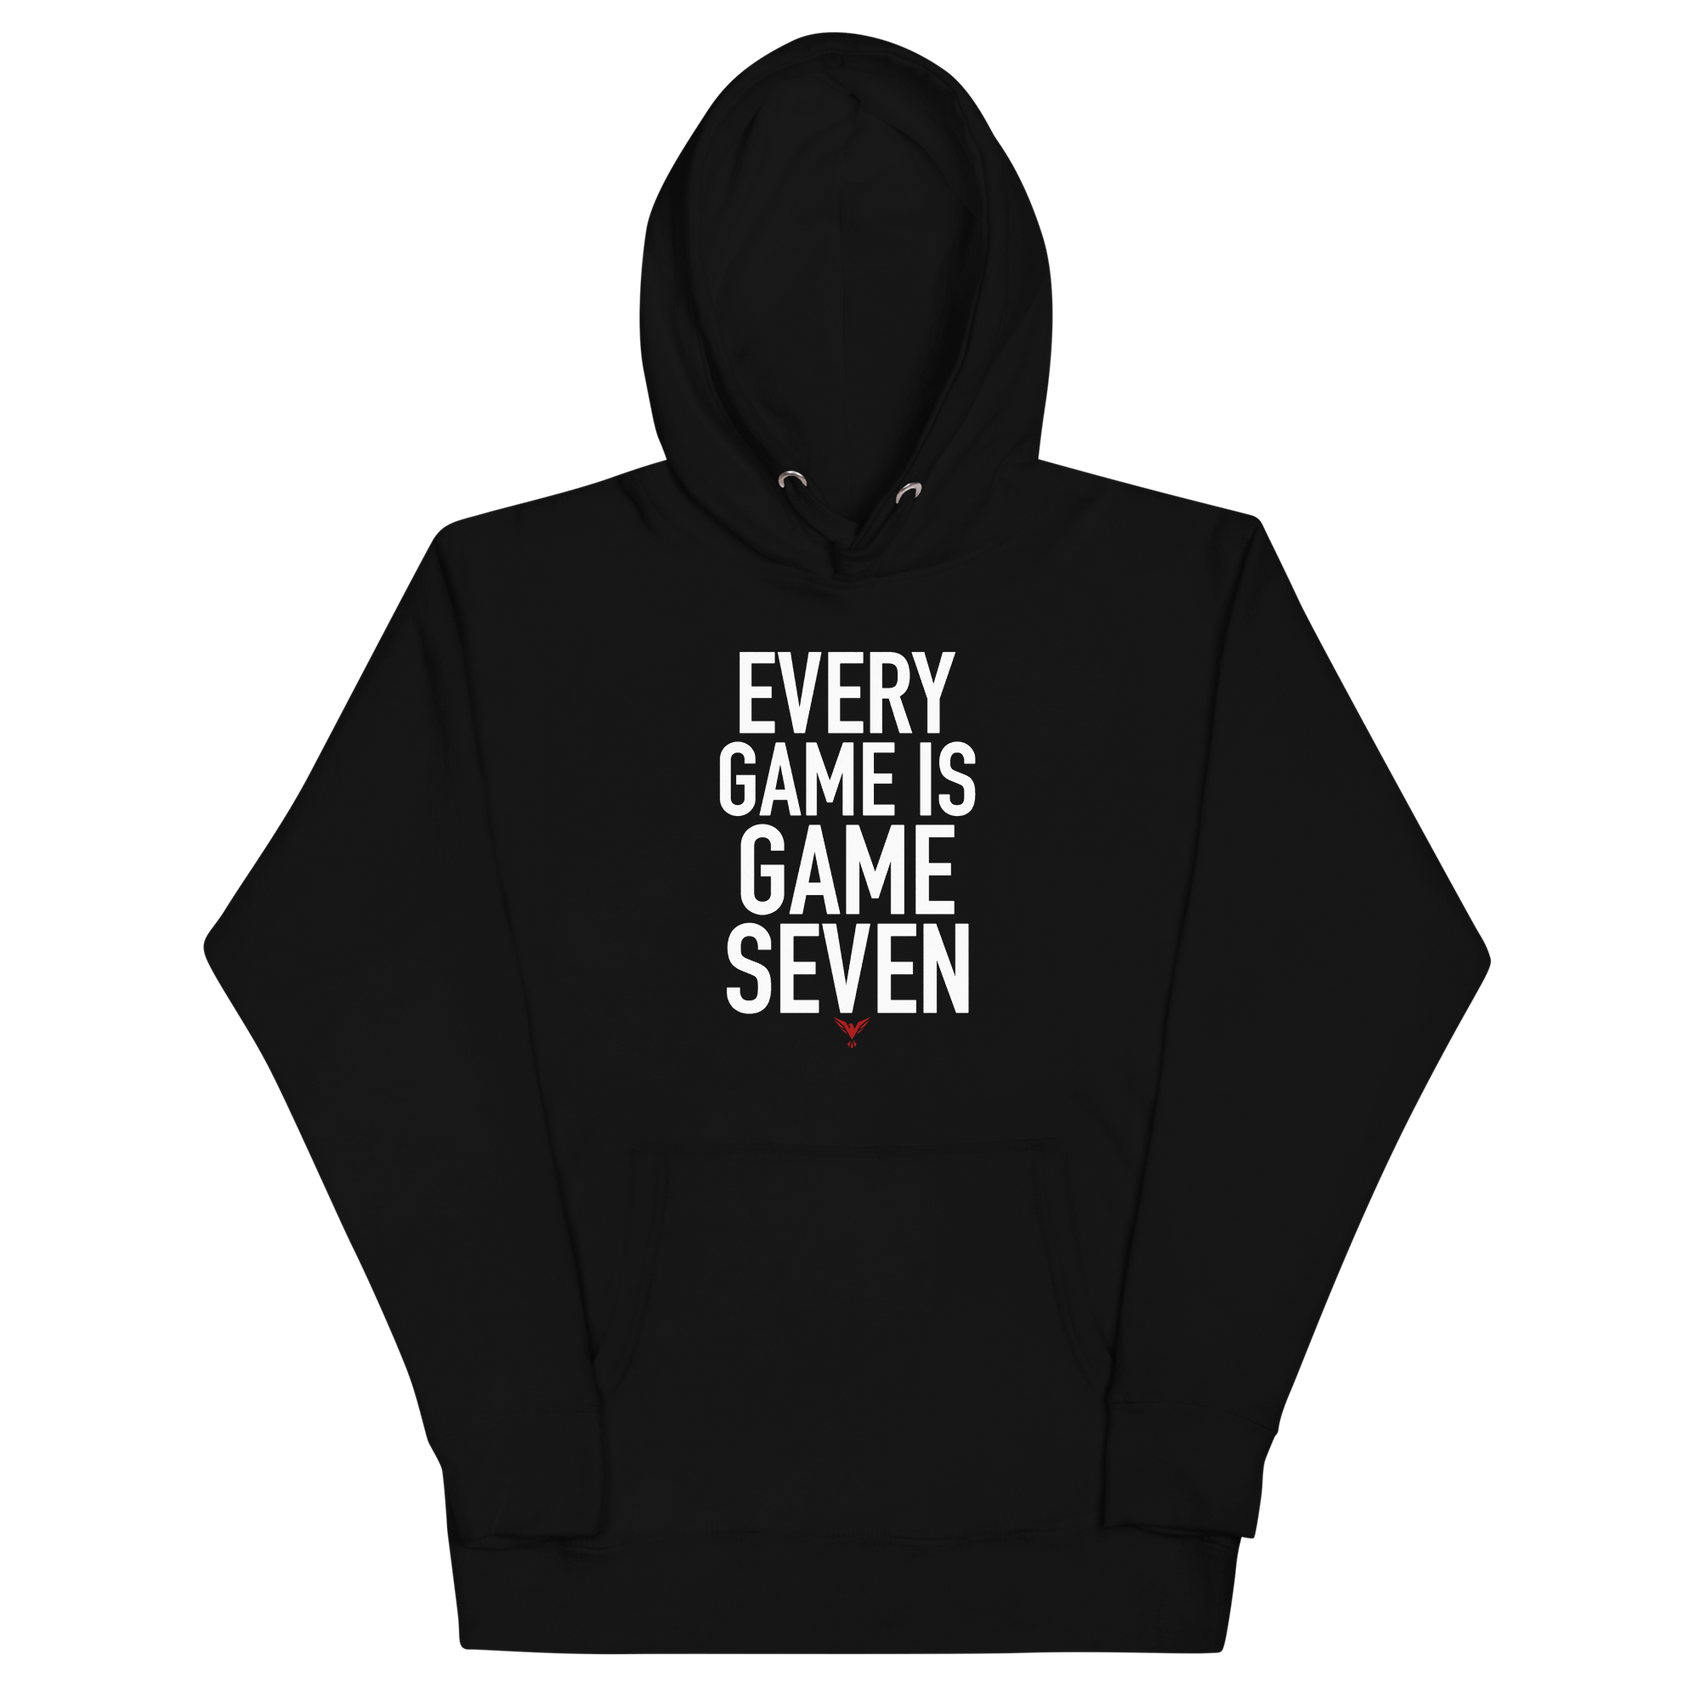 Every Game Is Game Seven HoodieThis Every Game Is Game Seven Hoodie by Win. is perfect for athletes, coaches, and sports fans alike. Crafted from 100% cotton, it features the bold "Every Game is GWin.Game